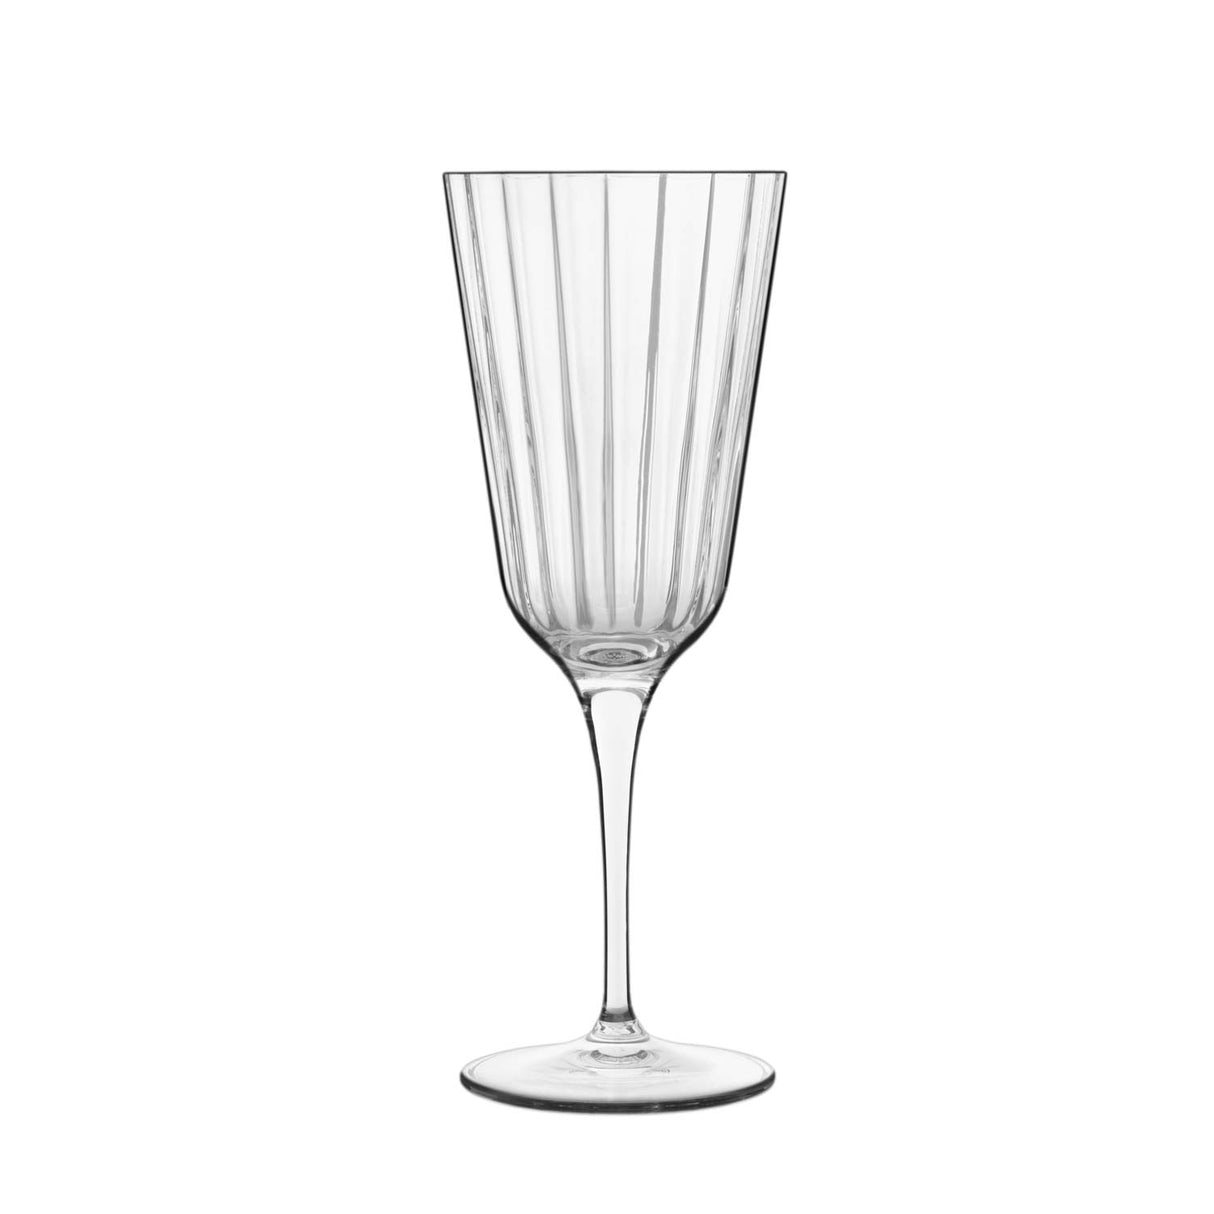 Vintage Cocktail - 250ml, Bach from Luigi Bormioli. made out of Glass and sold in boxes of 24. Hospitality quality at wholesale price with The Flying Fork! 